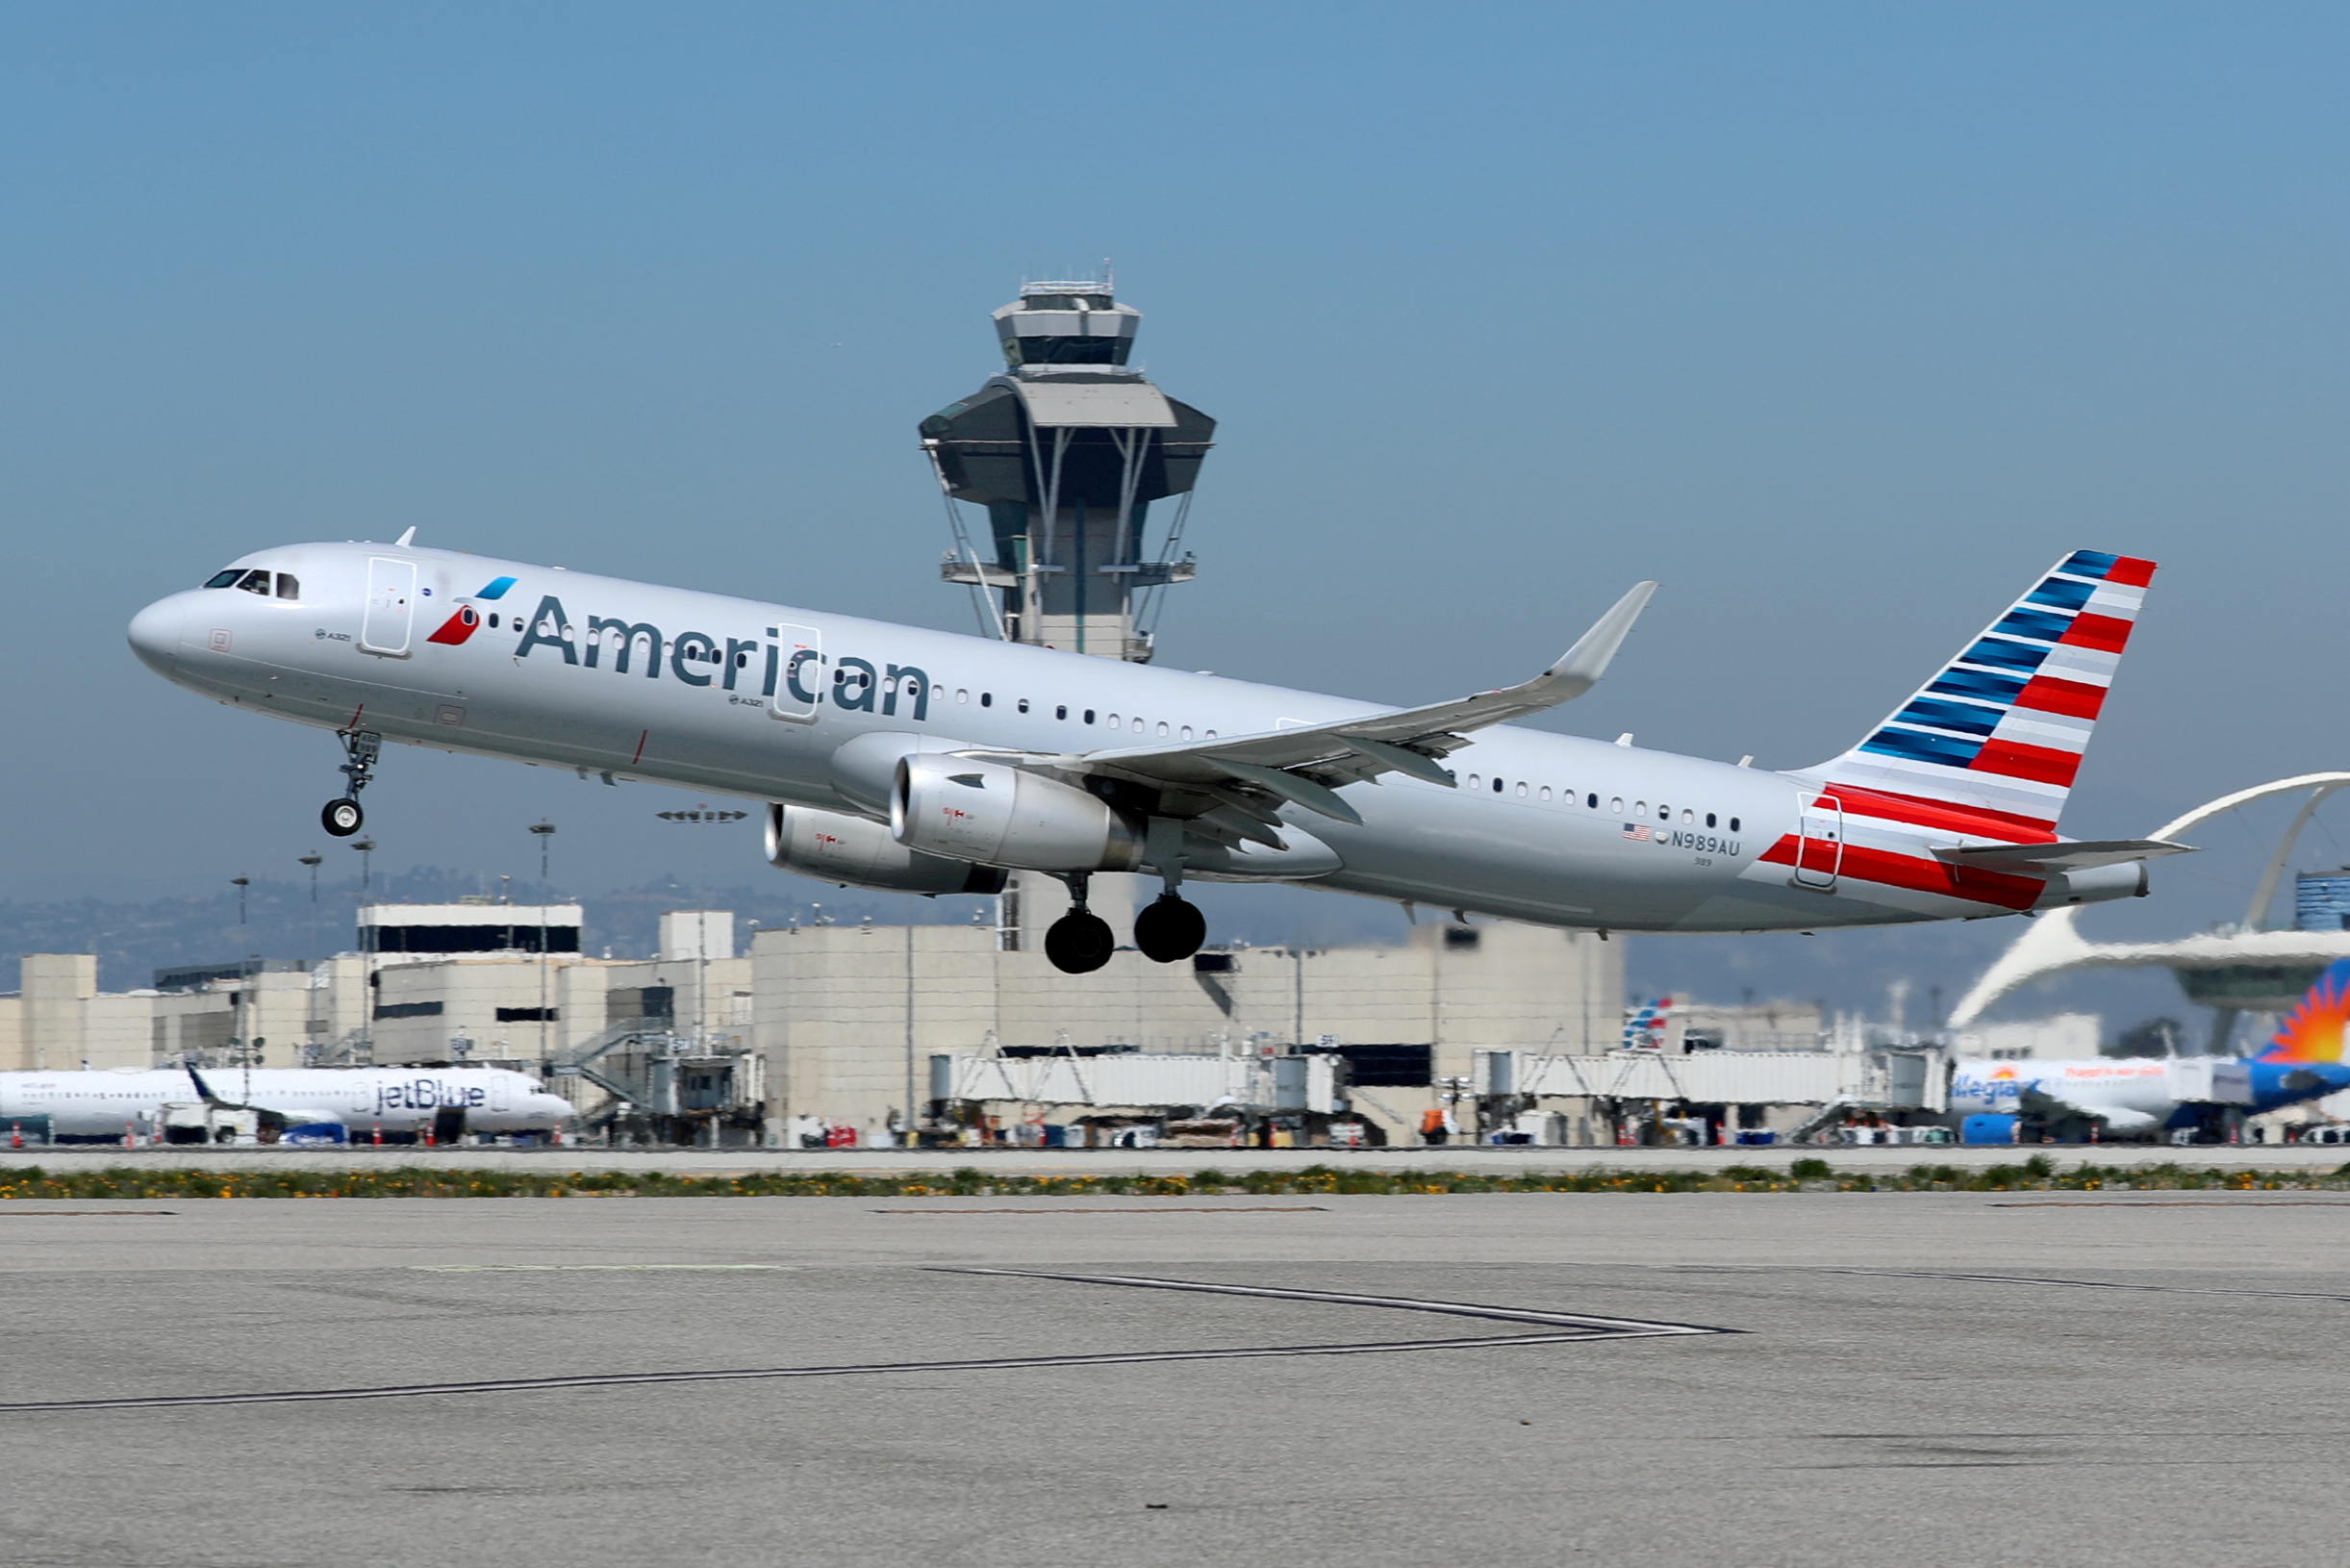 An American Airlines Airbus A321-200 plane takes off from Los Angeles International airport (LAX) in Los Angeles, California, U.S. March 28, 2018. REUTERS/Mike Blake